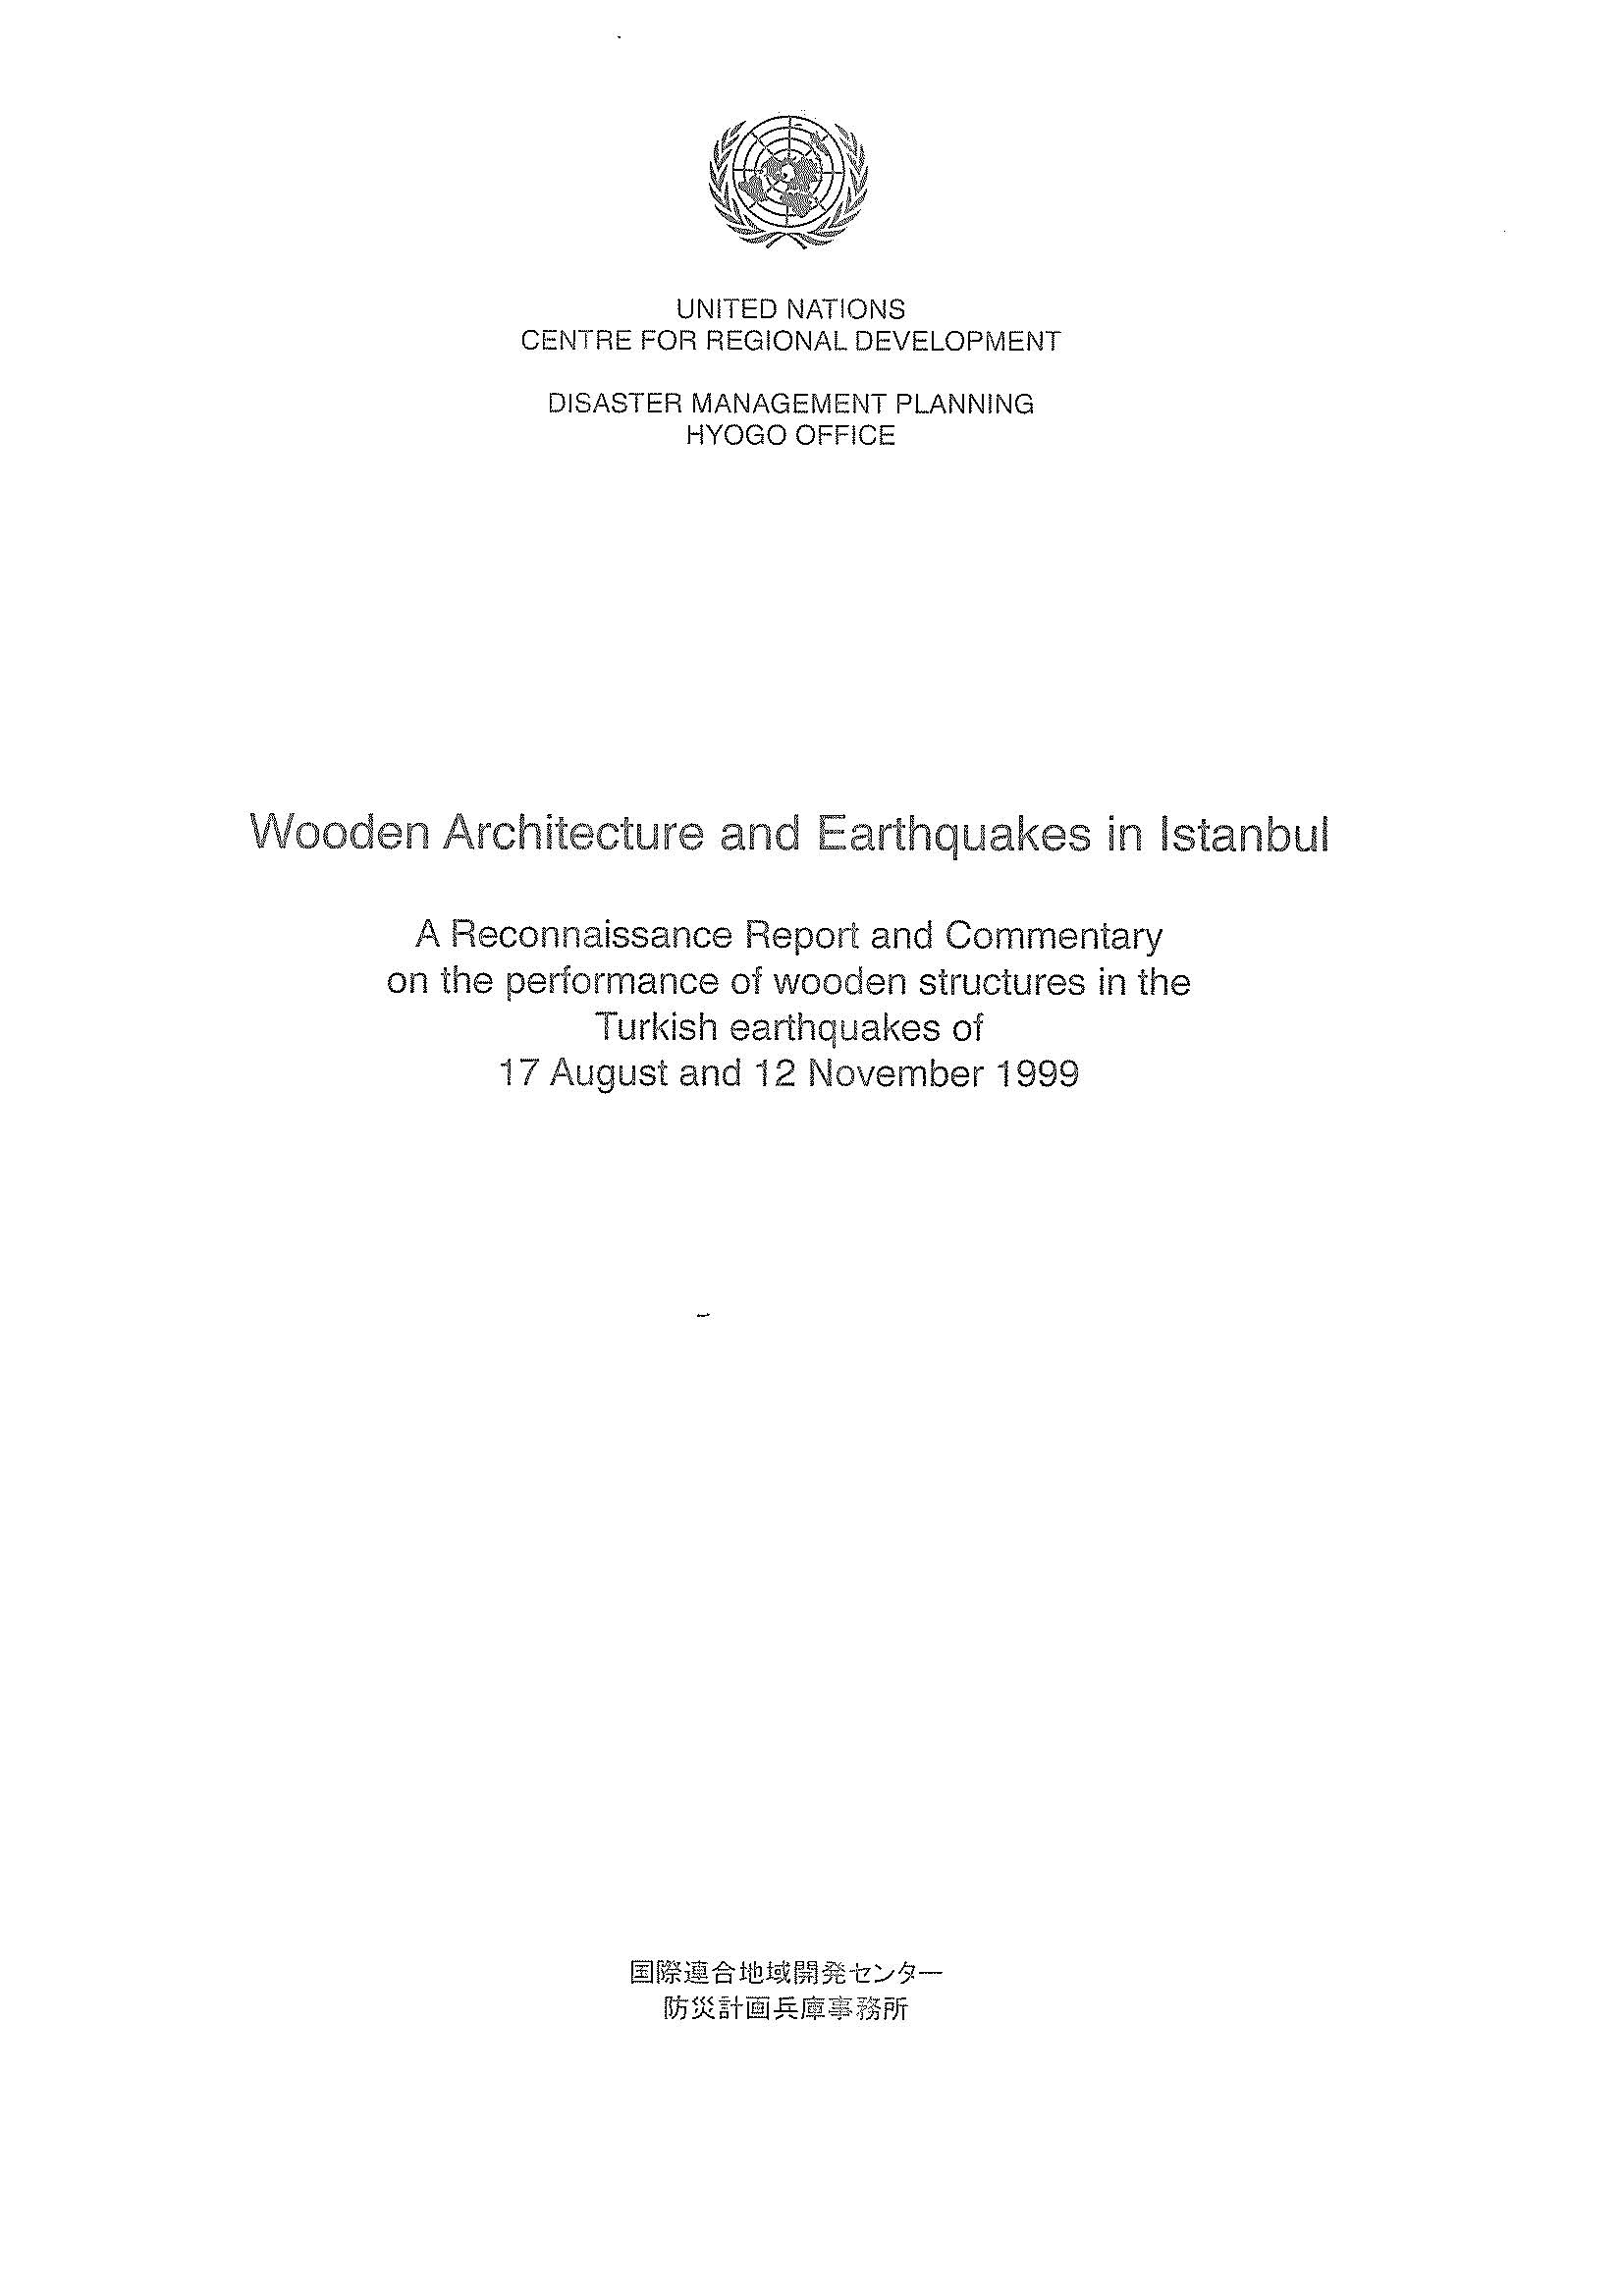 Cover of the report on Wooden Architecture and Earthquakes in Istanbul 